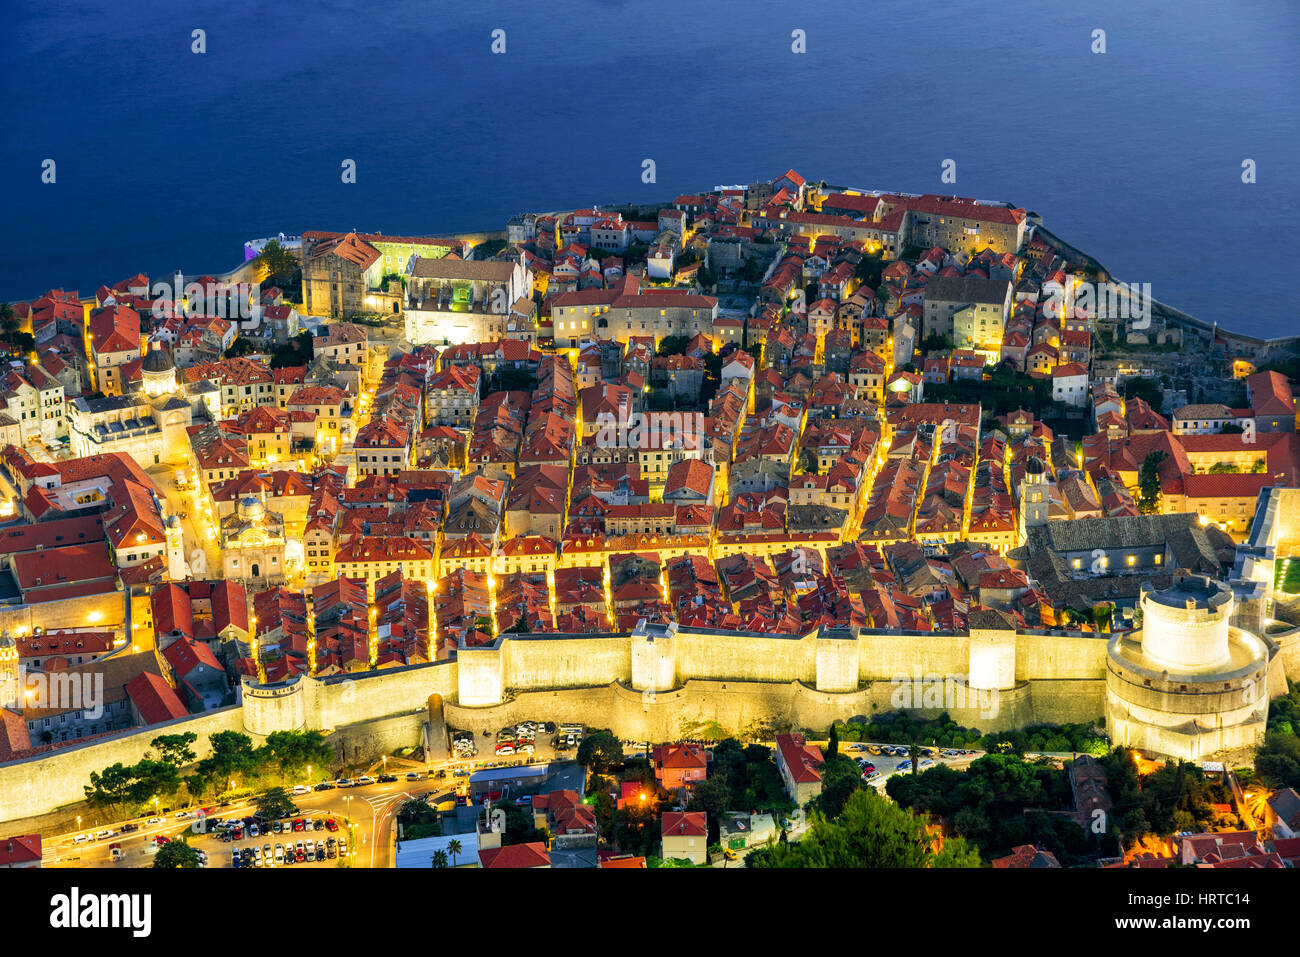 Aerial view of Dubrovnik old town at night Stock Photo